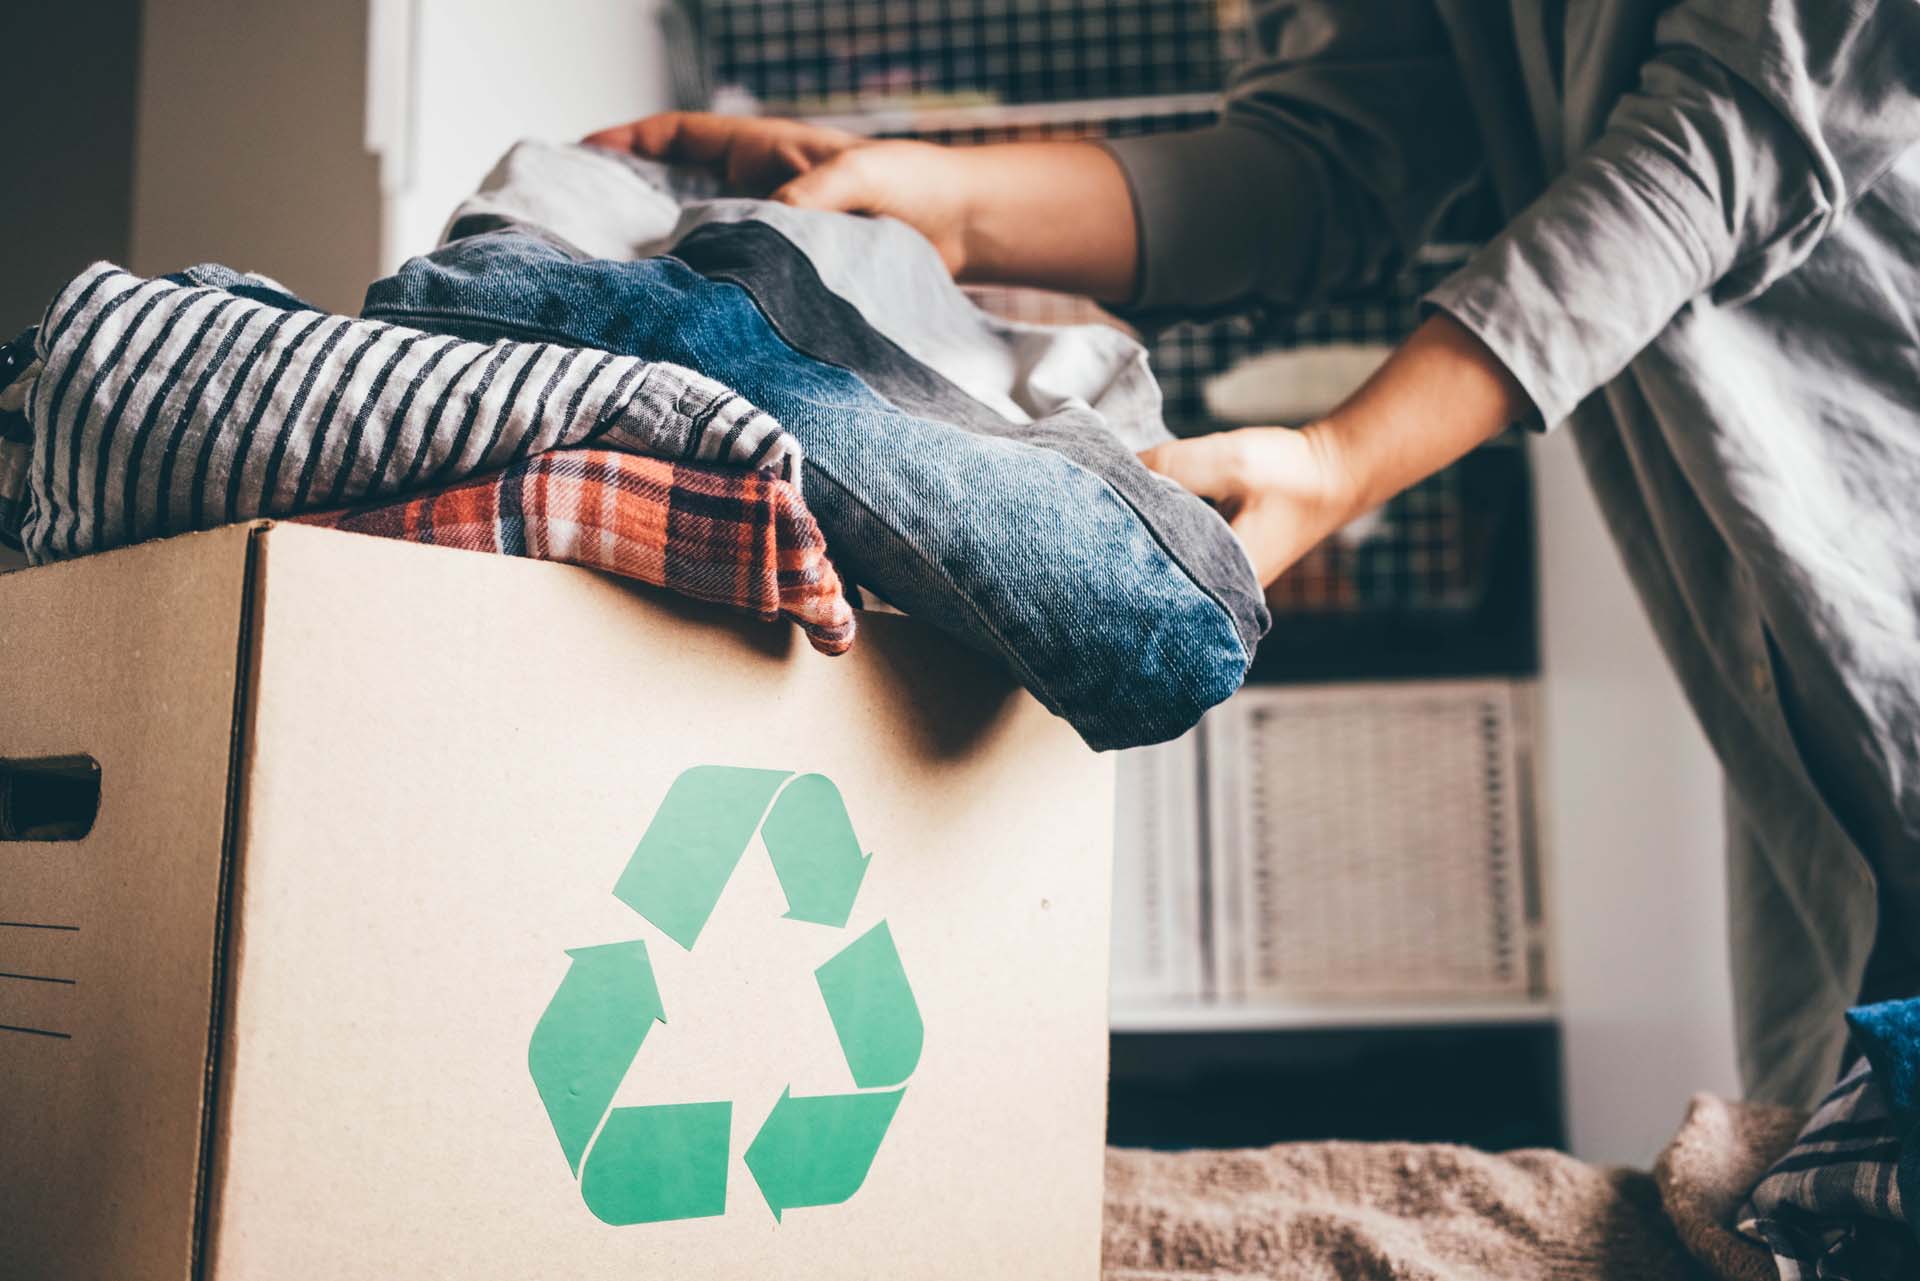 A person putting old clothes into a box to be recycled